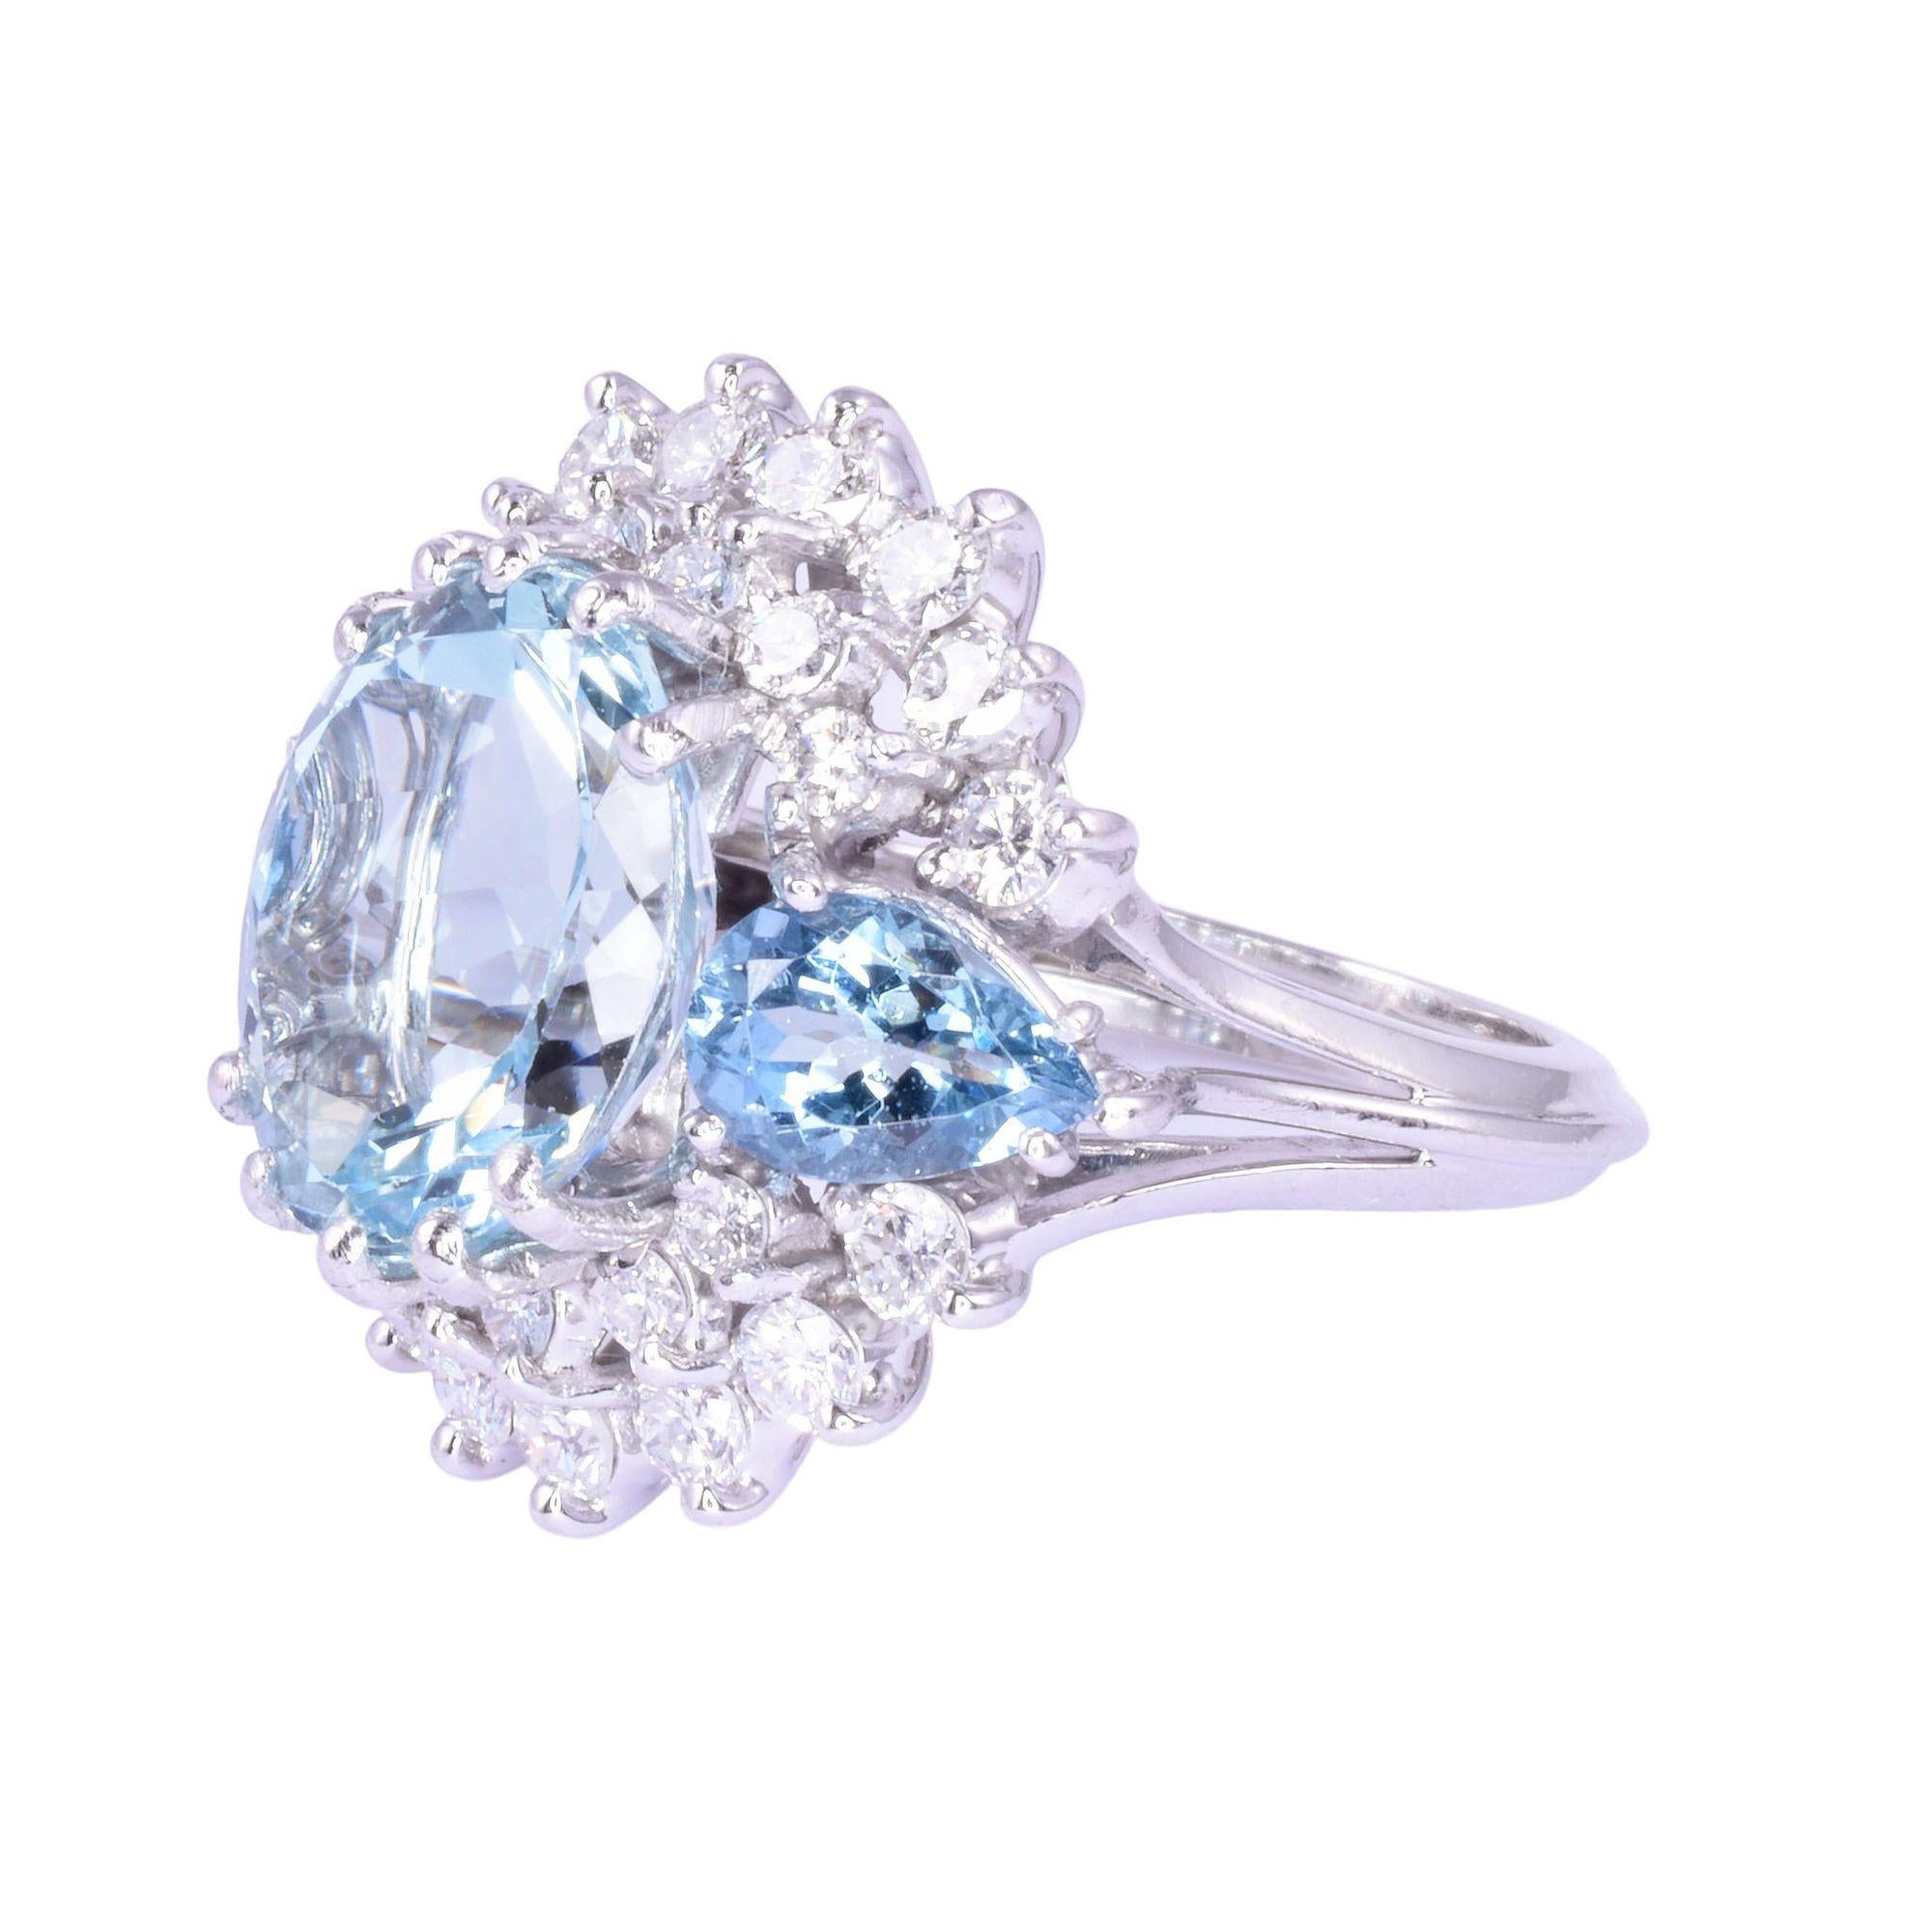 Estate oval & pear aquamarine ring. This platinum ring features an oval aquamarine center at 4.86 carats flanked by pear aquamarine at 1.08 carat total weight. There are also 26 full cut accent diamonds at 1.00 carat total weight with VS1-SI2